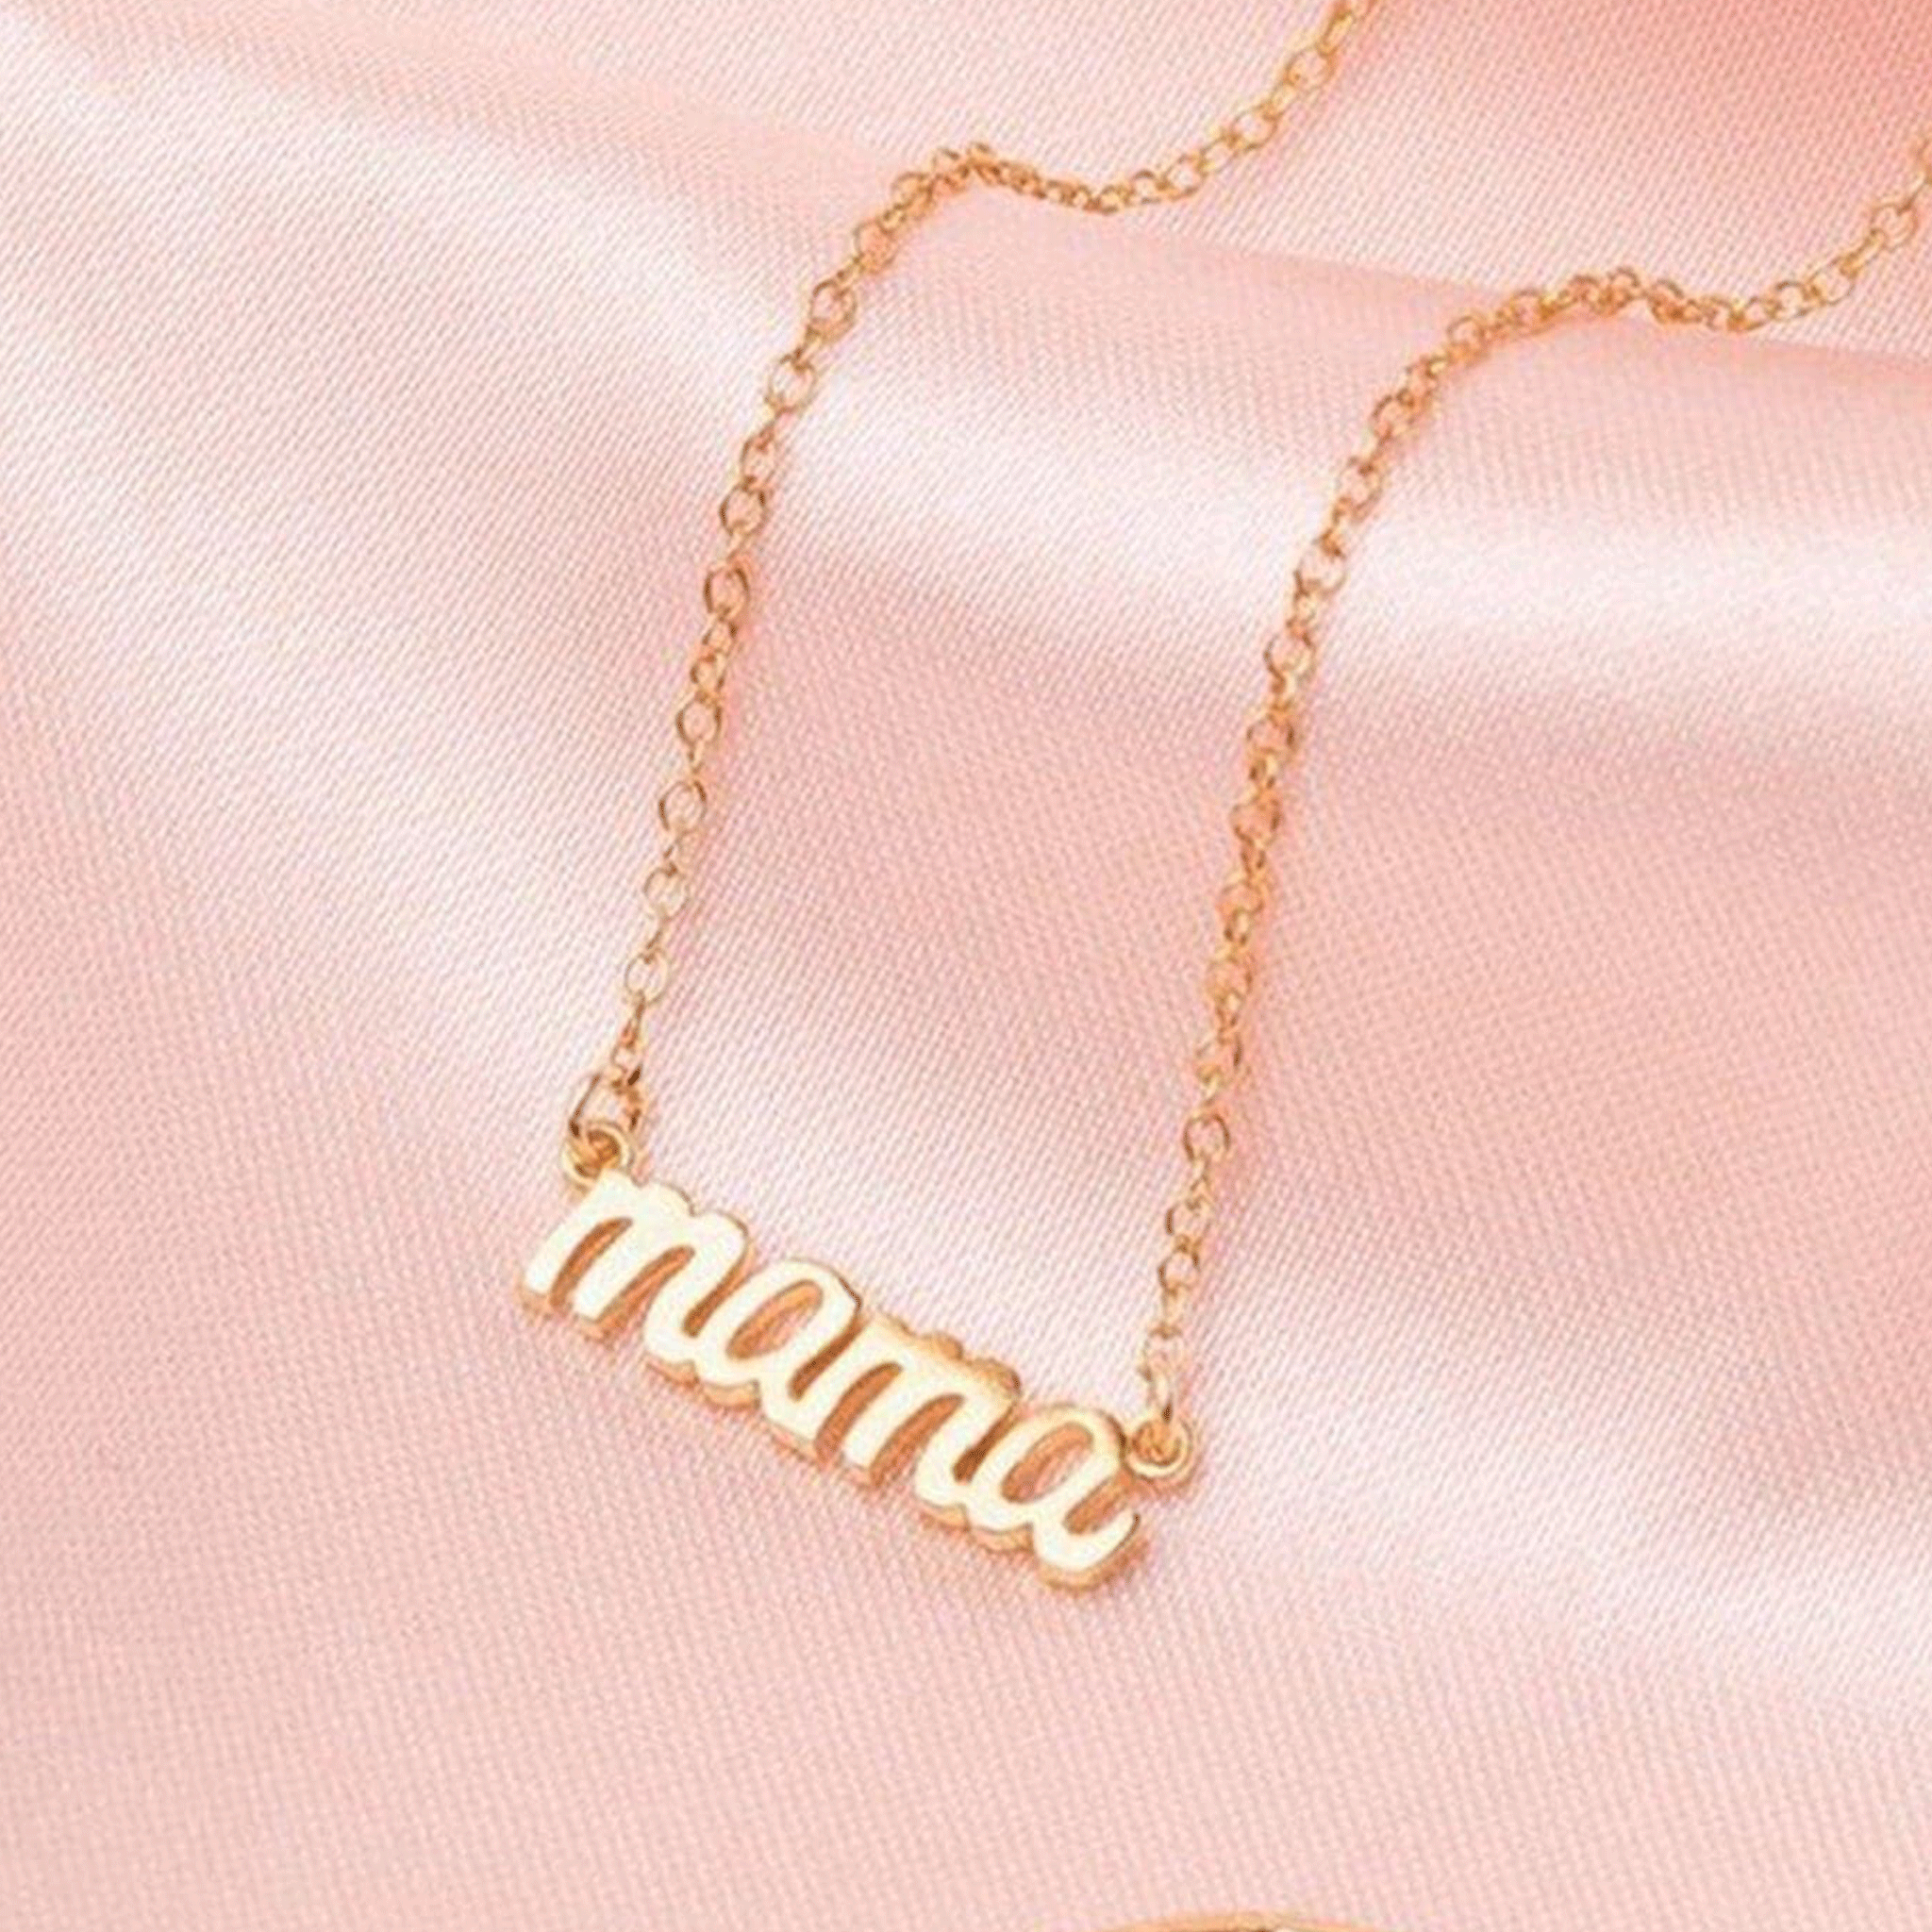 A dainty chain necklace with a small &quot;mama&quot; charm.